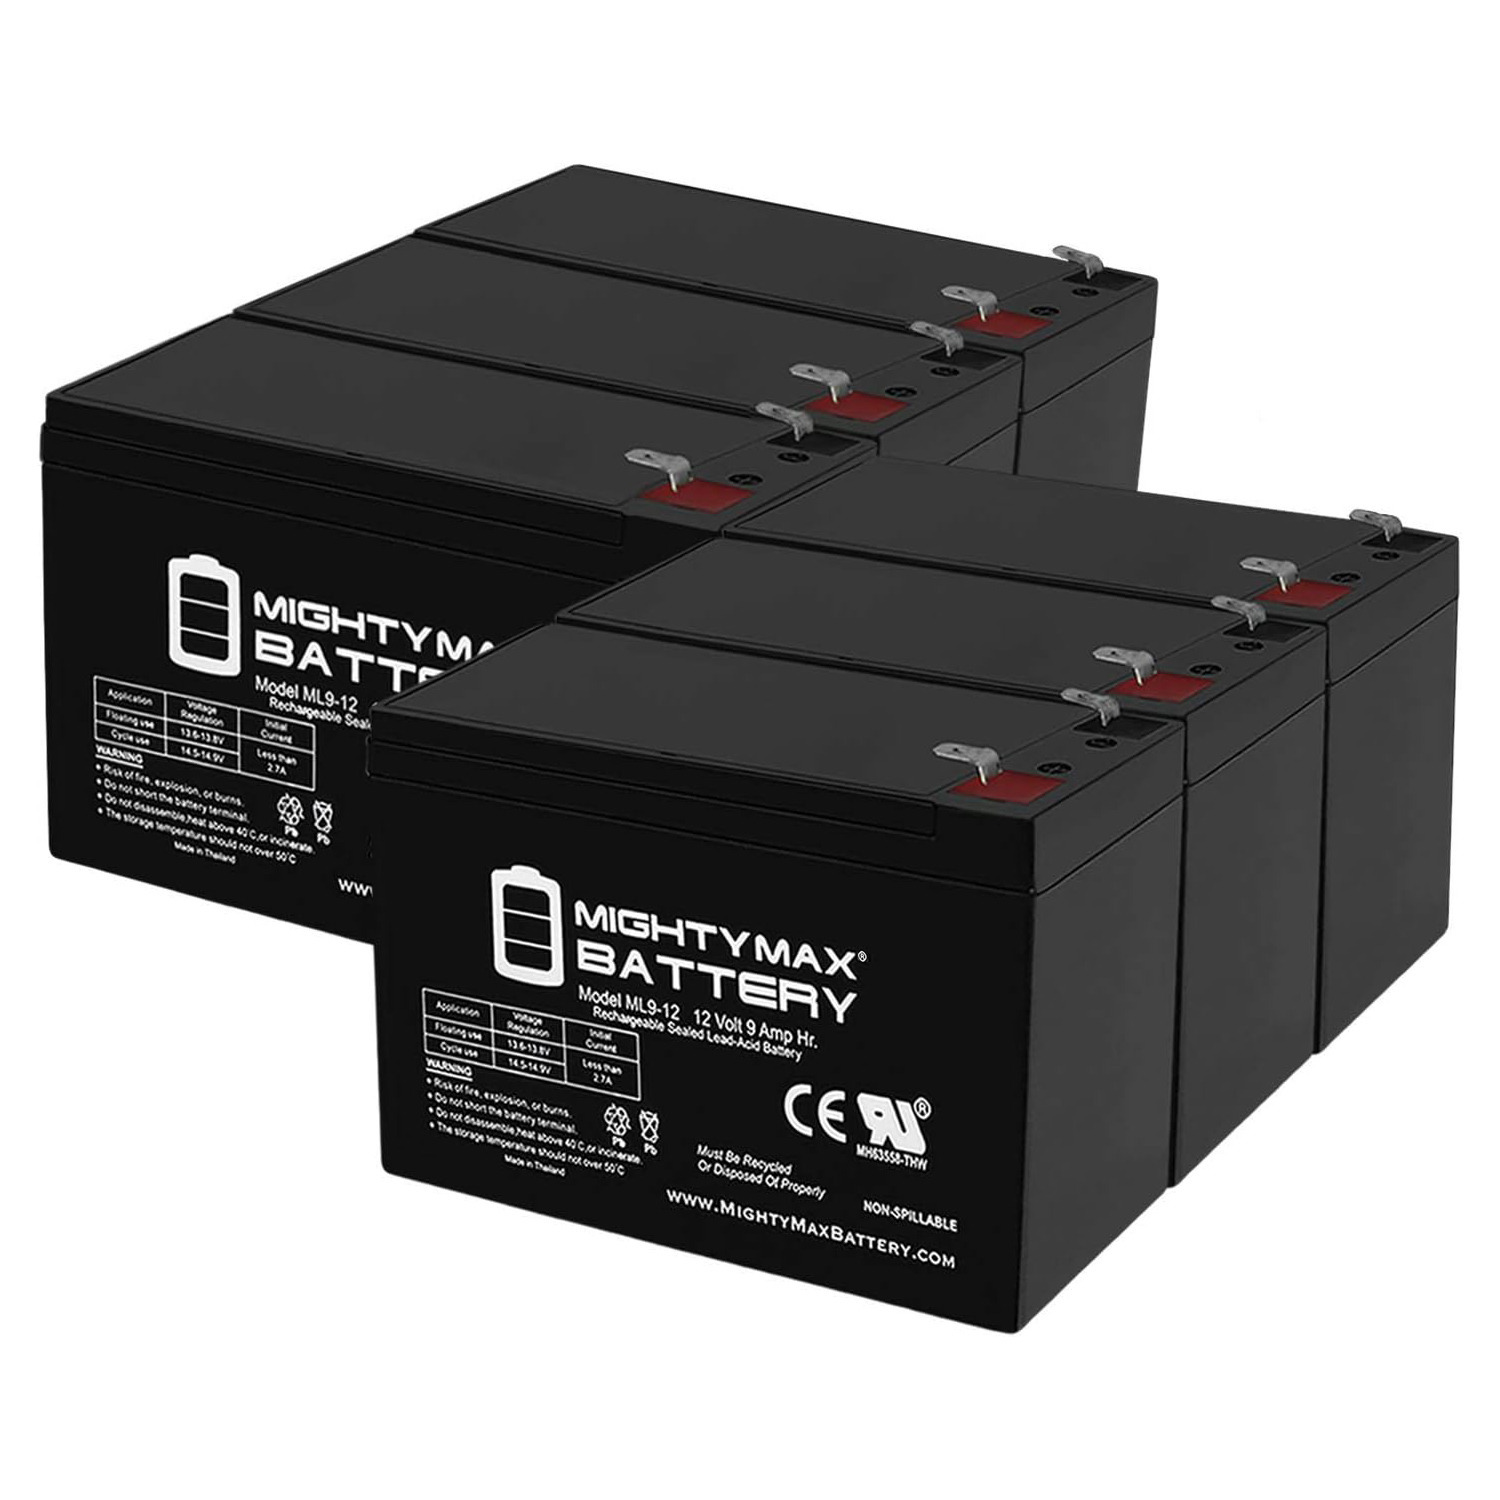 Altronix SMP5PMCTXPD8 12V, 9Ah Lead Acid Battery - 6 Pack